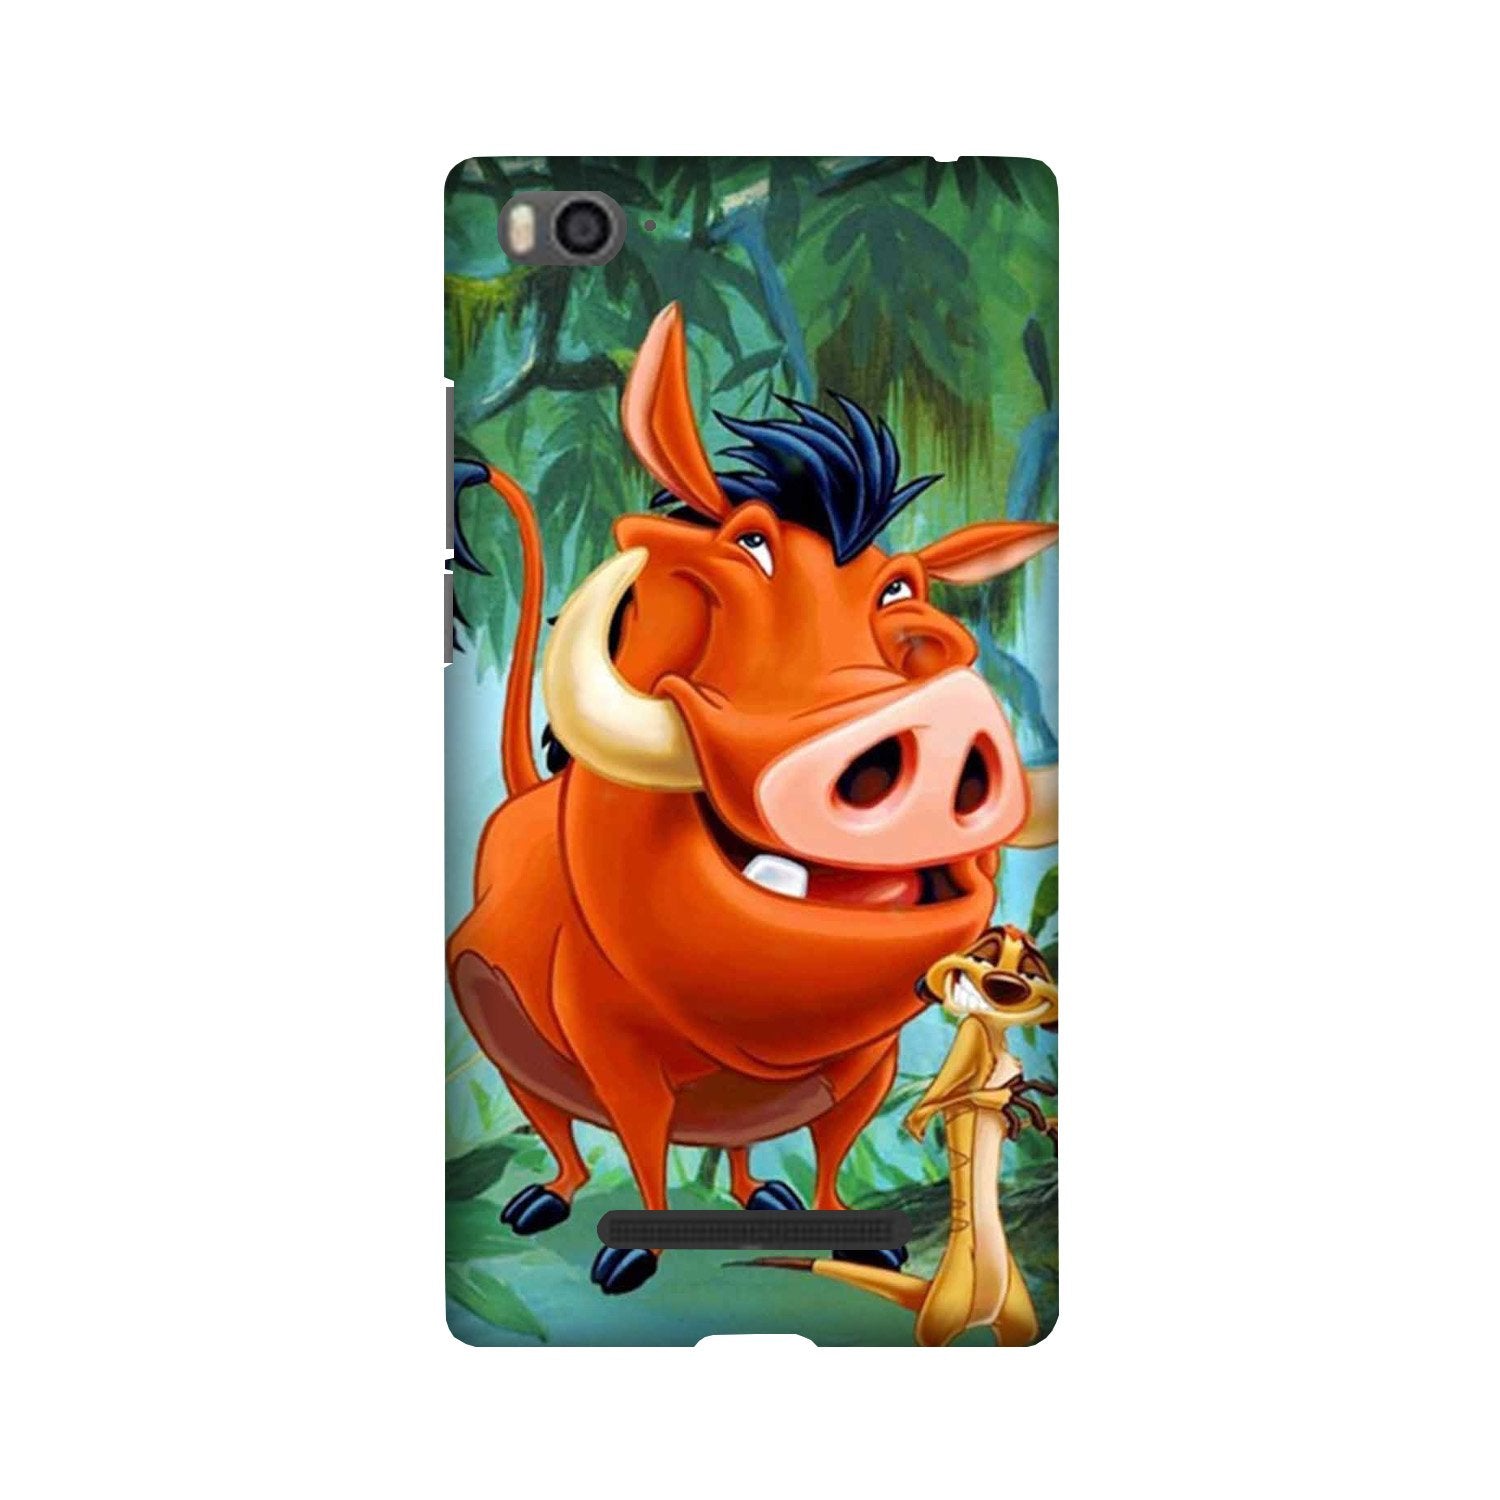 Timon and Pumbaa Mobile Back Case for Redmi 4A  (Design - 305)